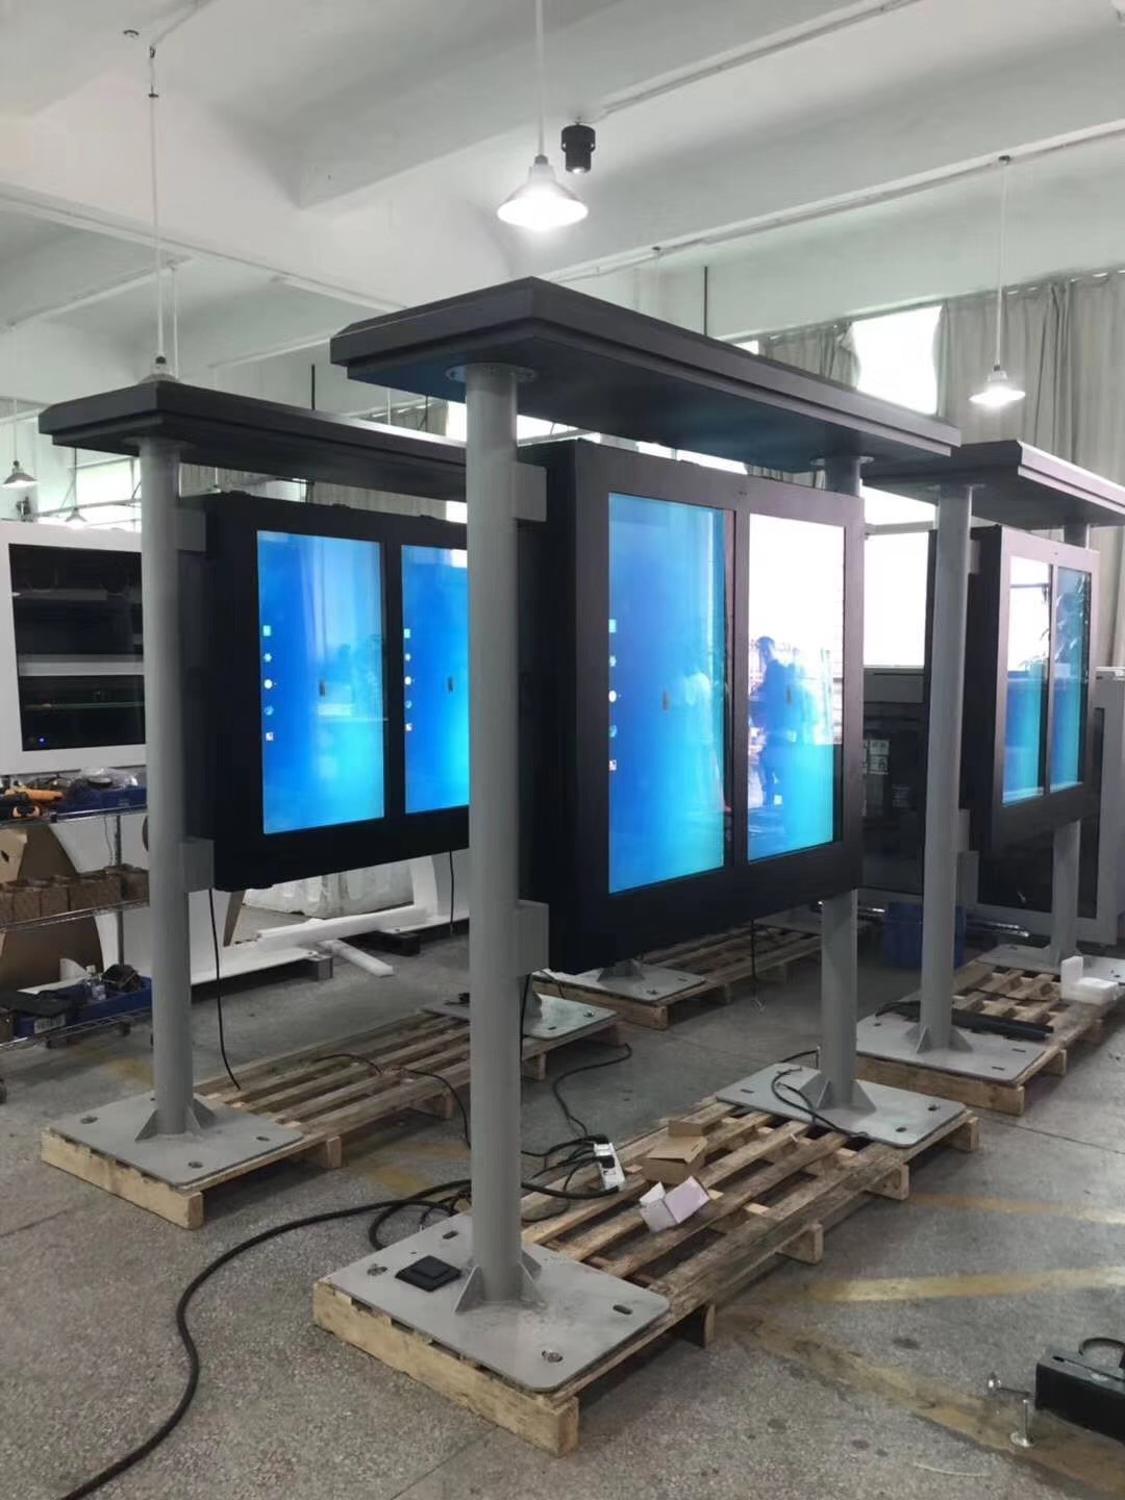 47 55 65inch outdoor FHD 1080p water proof cctv monitor lcd led advertising display screen digital signage